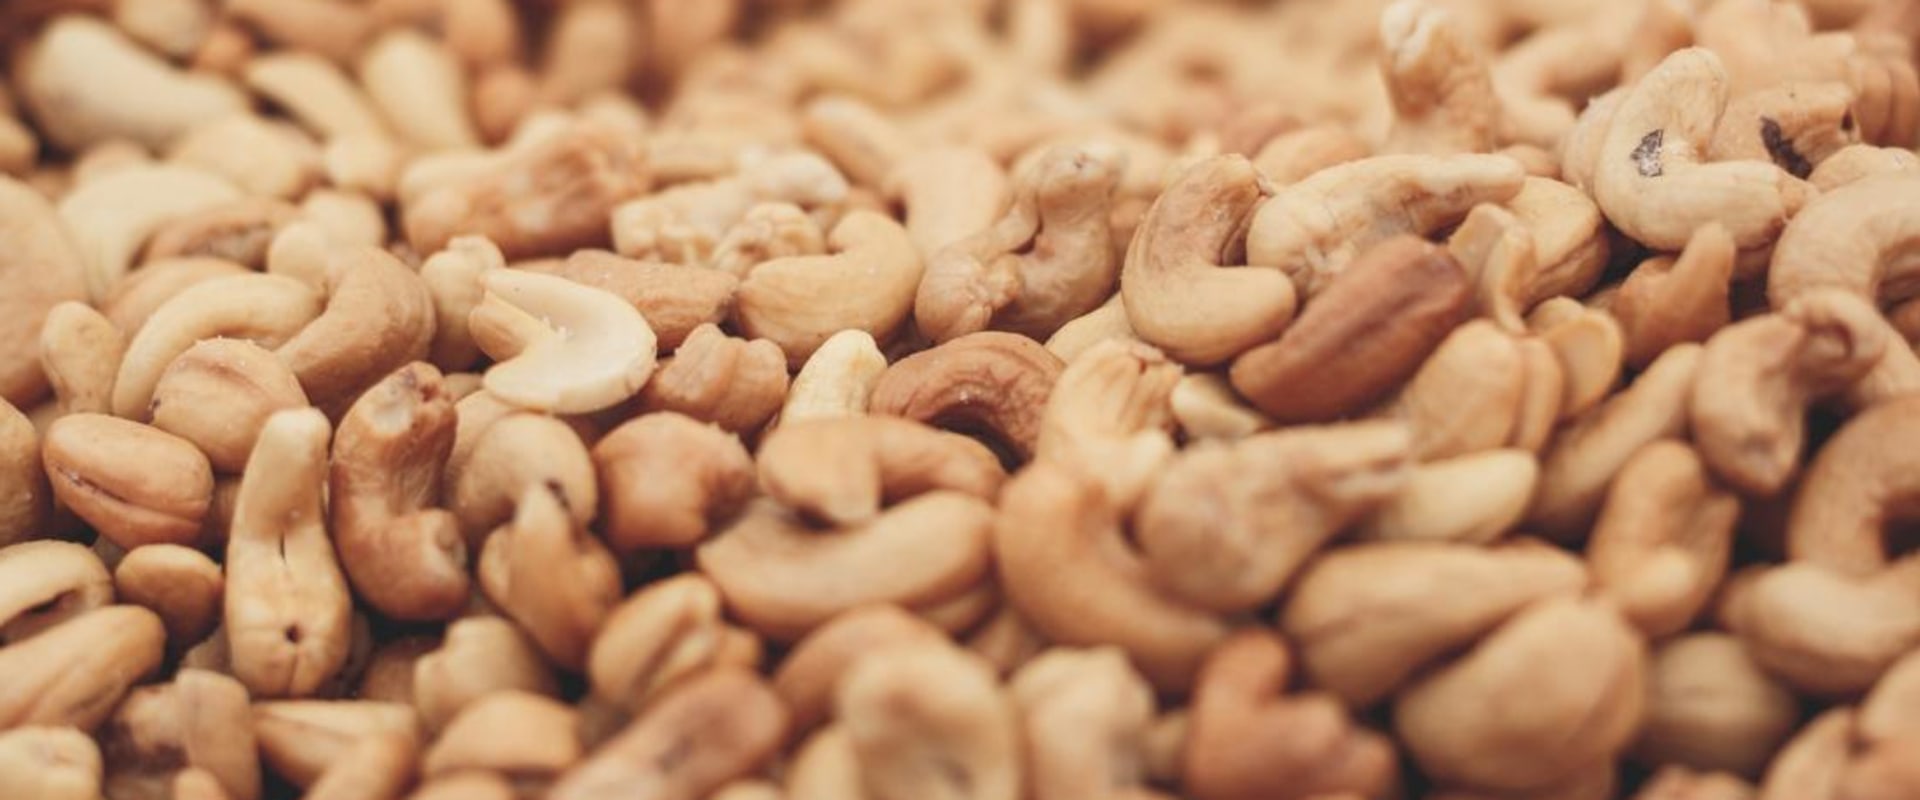 How many cashews can we eat in a day?